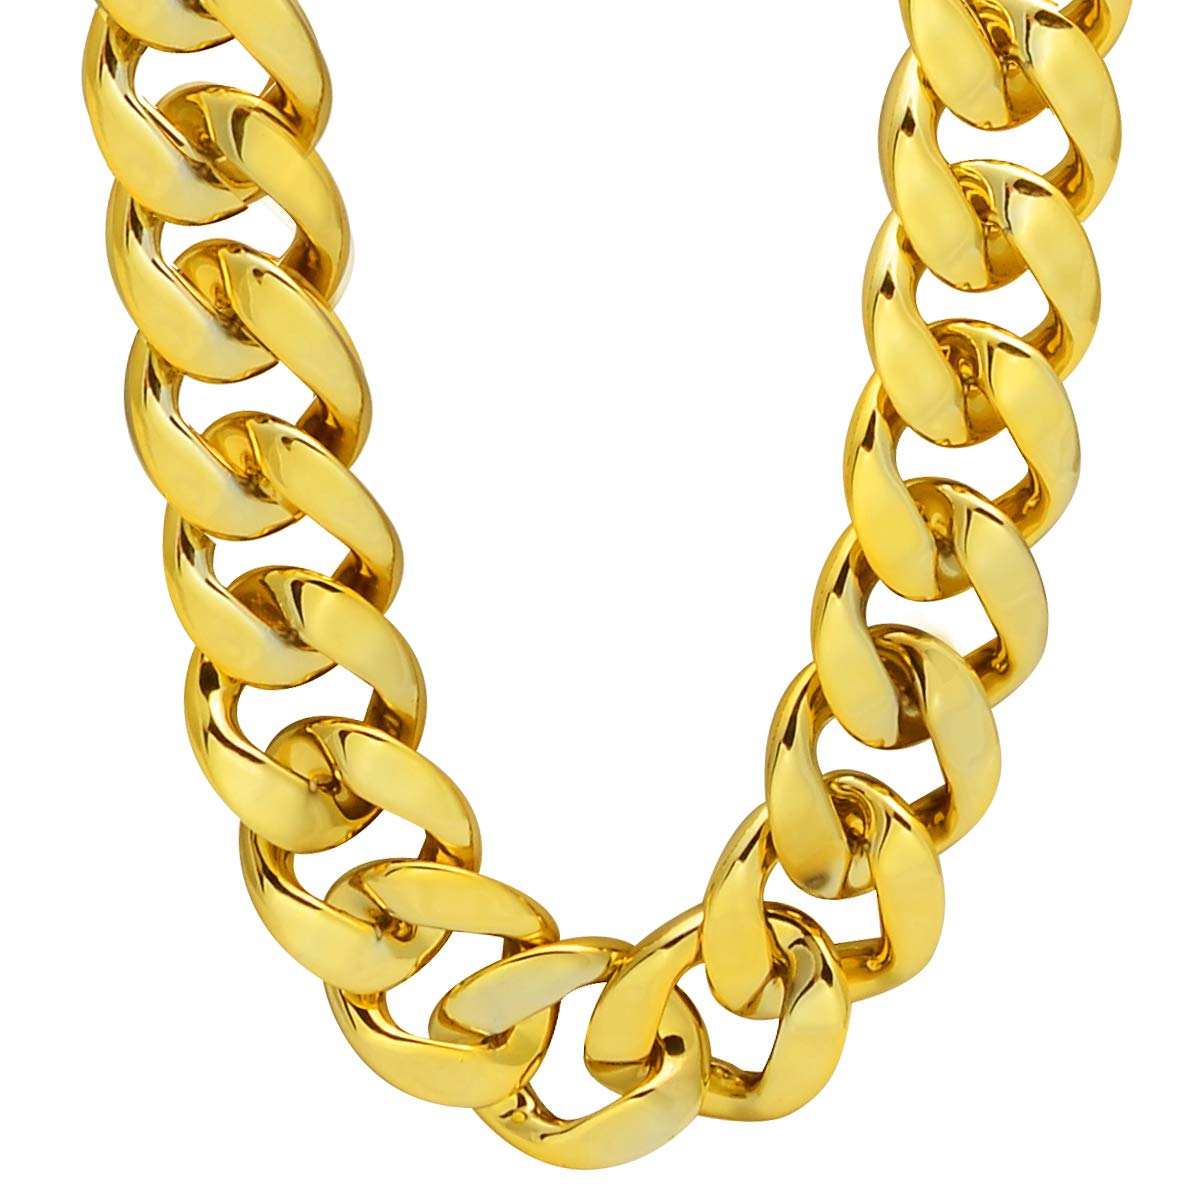 CrazyPiercing Faux Gold Acrylic Chain Necklace, 90s Punk Style Necklace Costume Jewelry, Hip Hop Turnover Chain Necklace, Plastic 32 inches, 36 inches 35mm